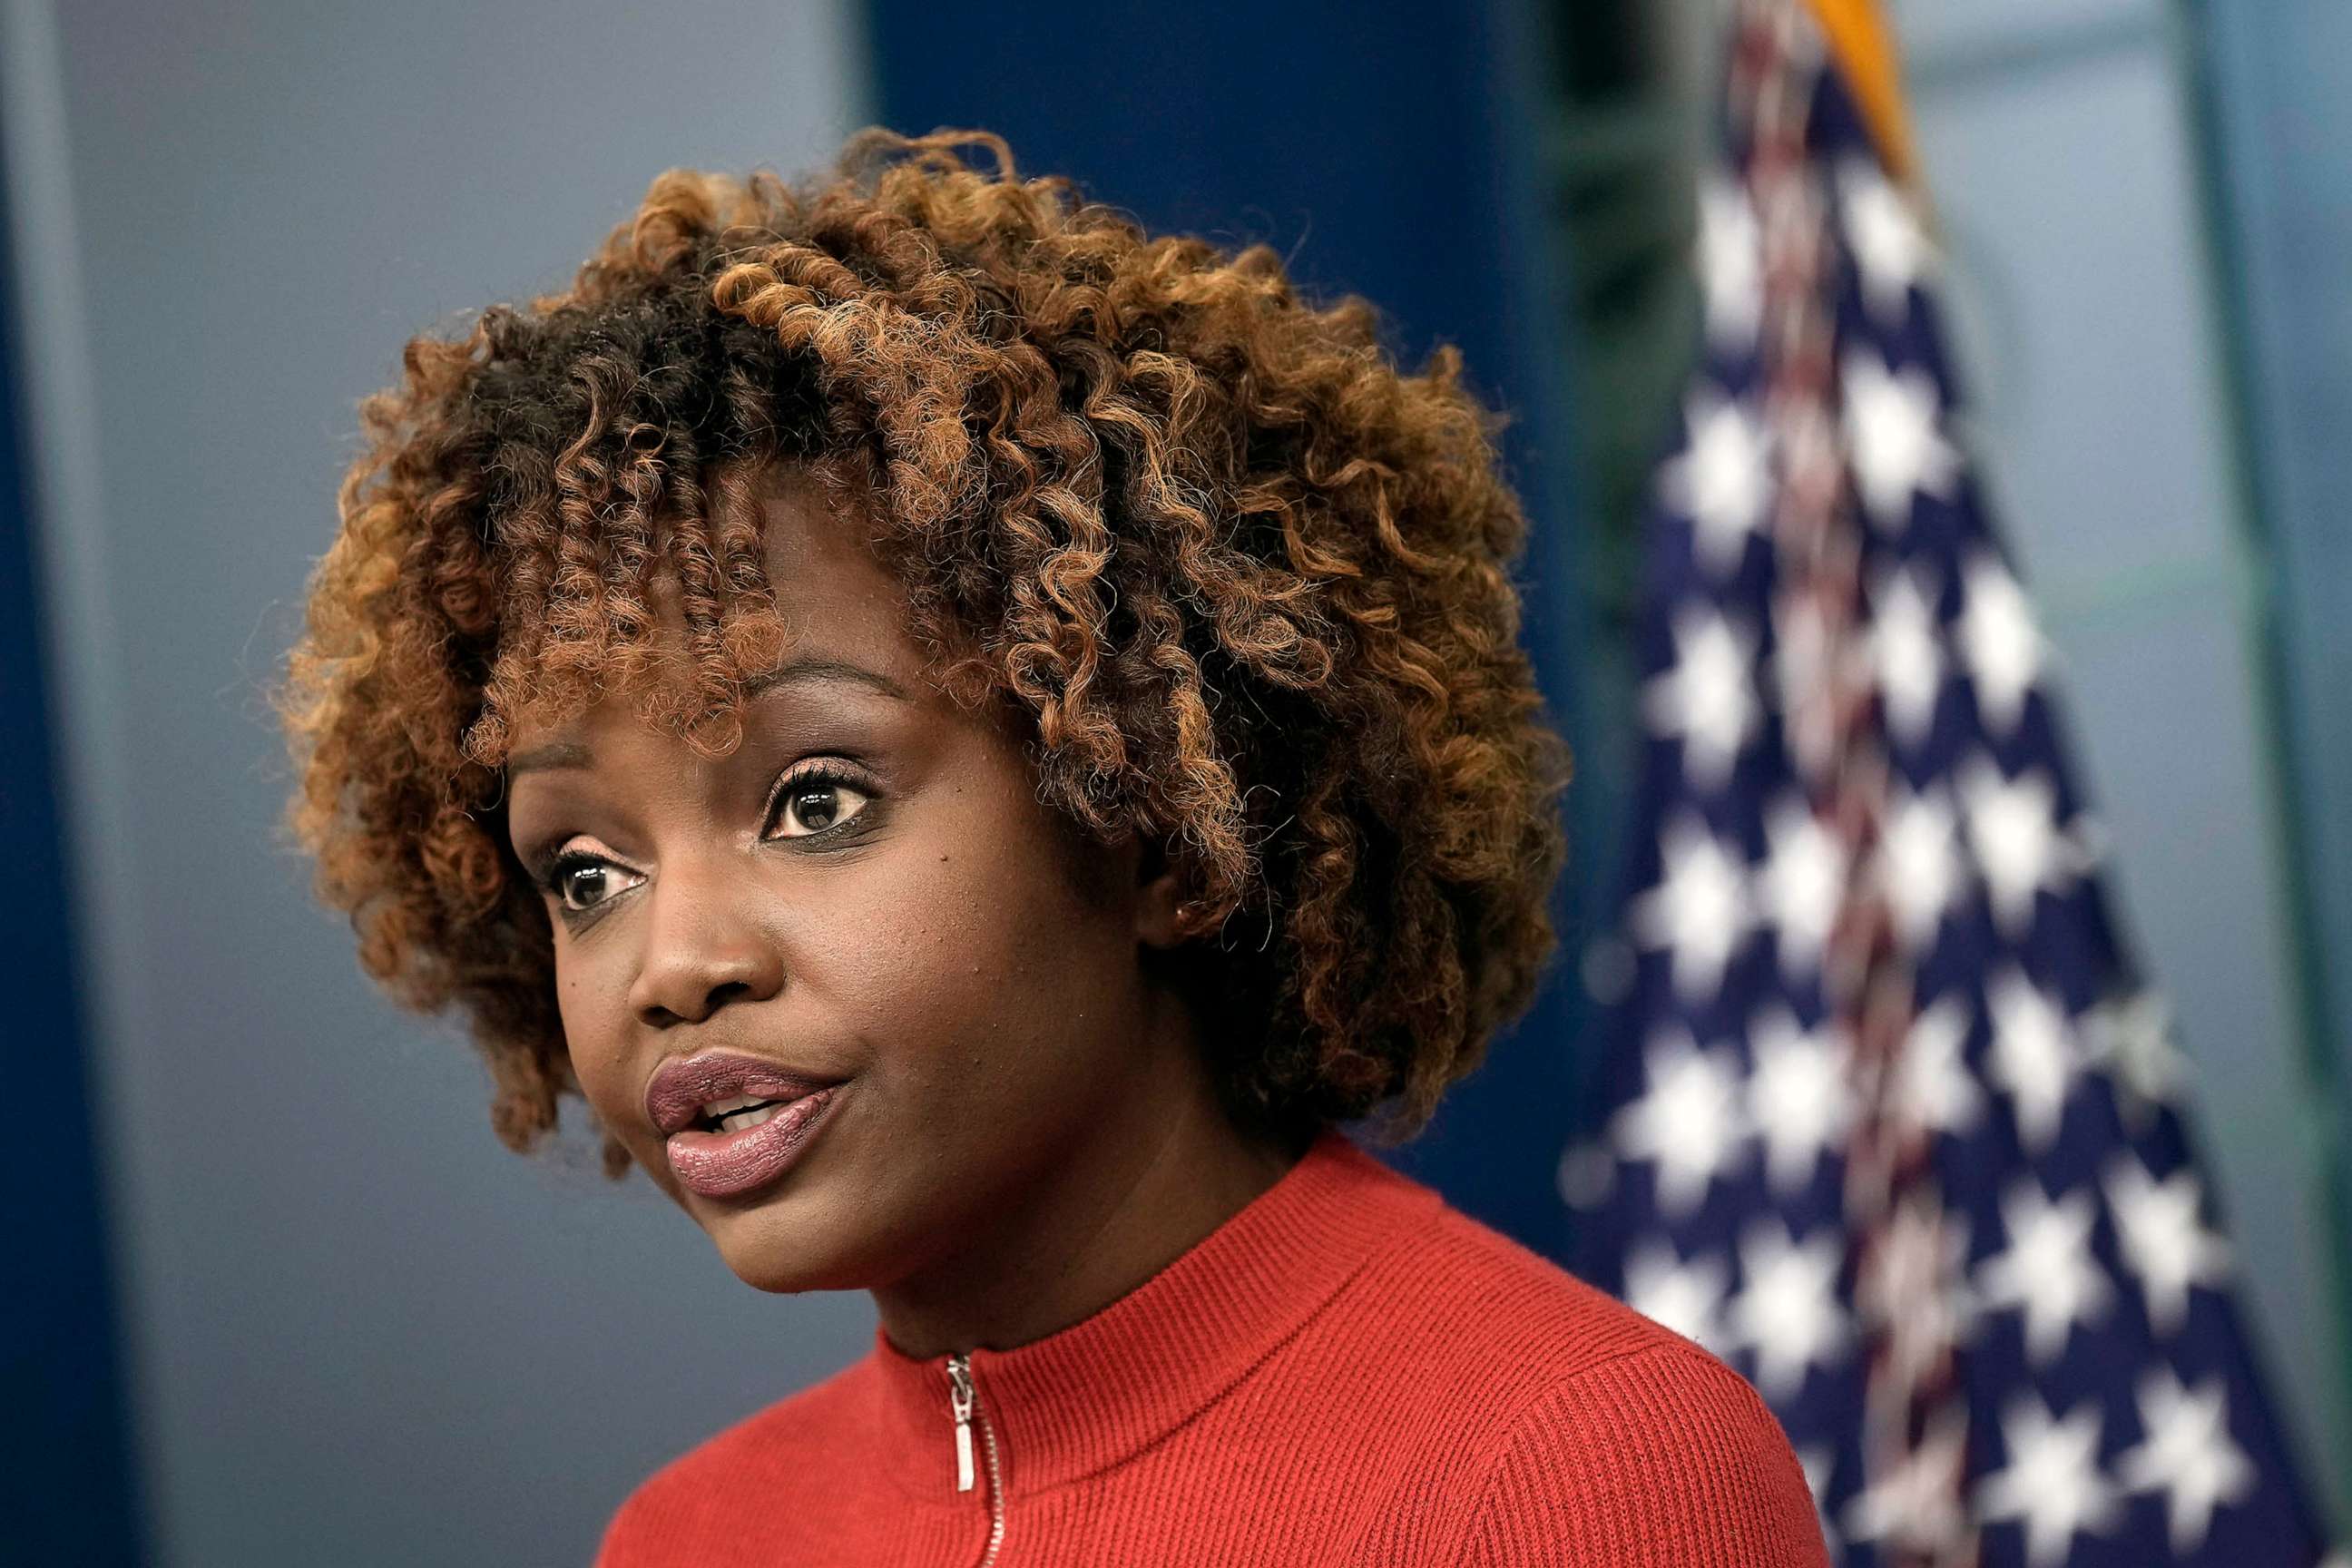 PHOTO: White House Press Secretary Karine Jean-Pierre speaks during the daily press briefing at the White House, Feb. 13, 2023 in Washington, DC.